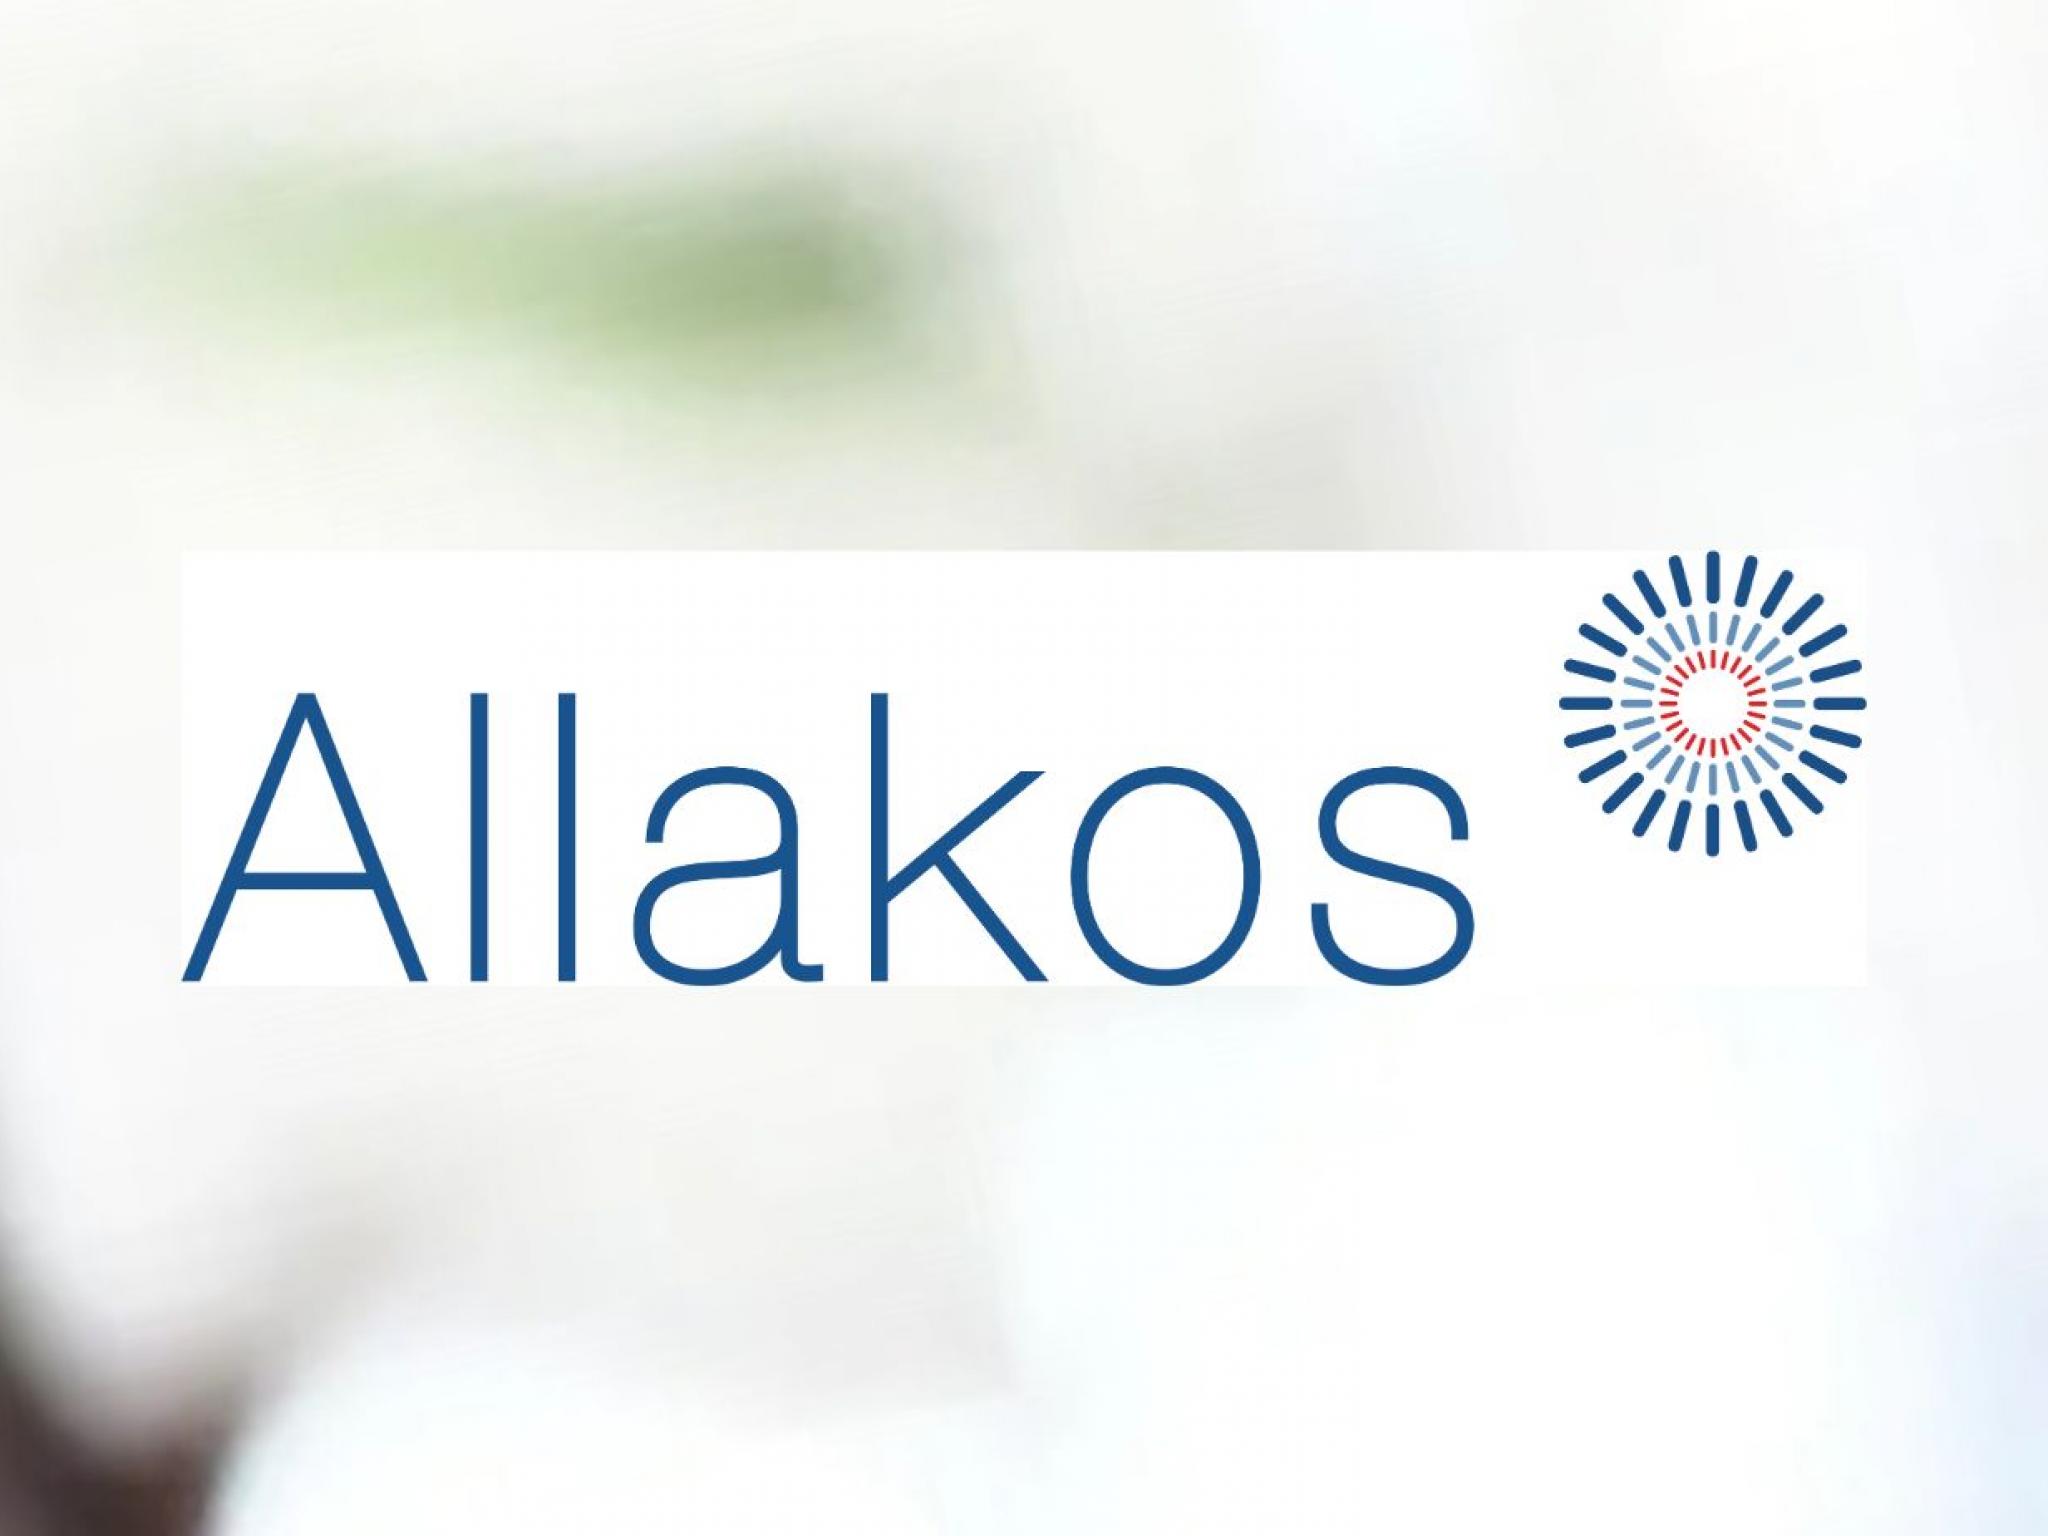  allakos-analyst-turns-bullish-sees-significant-upside-if-study-results-are-positive 